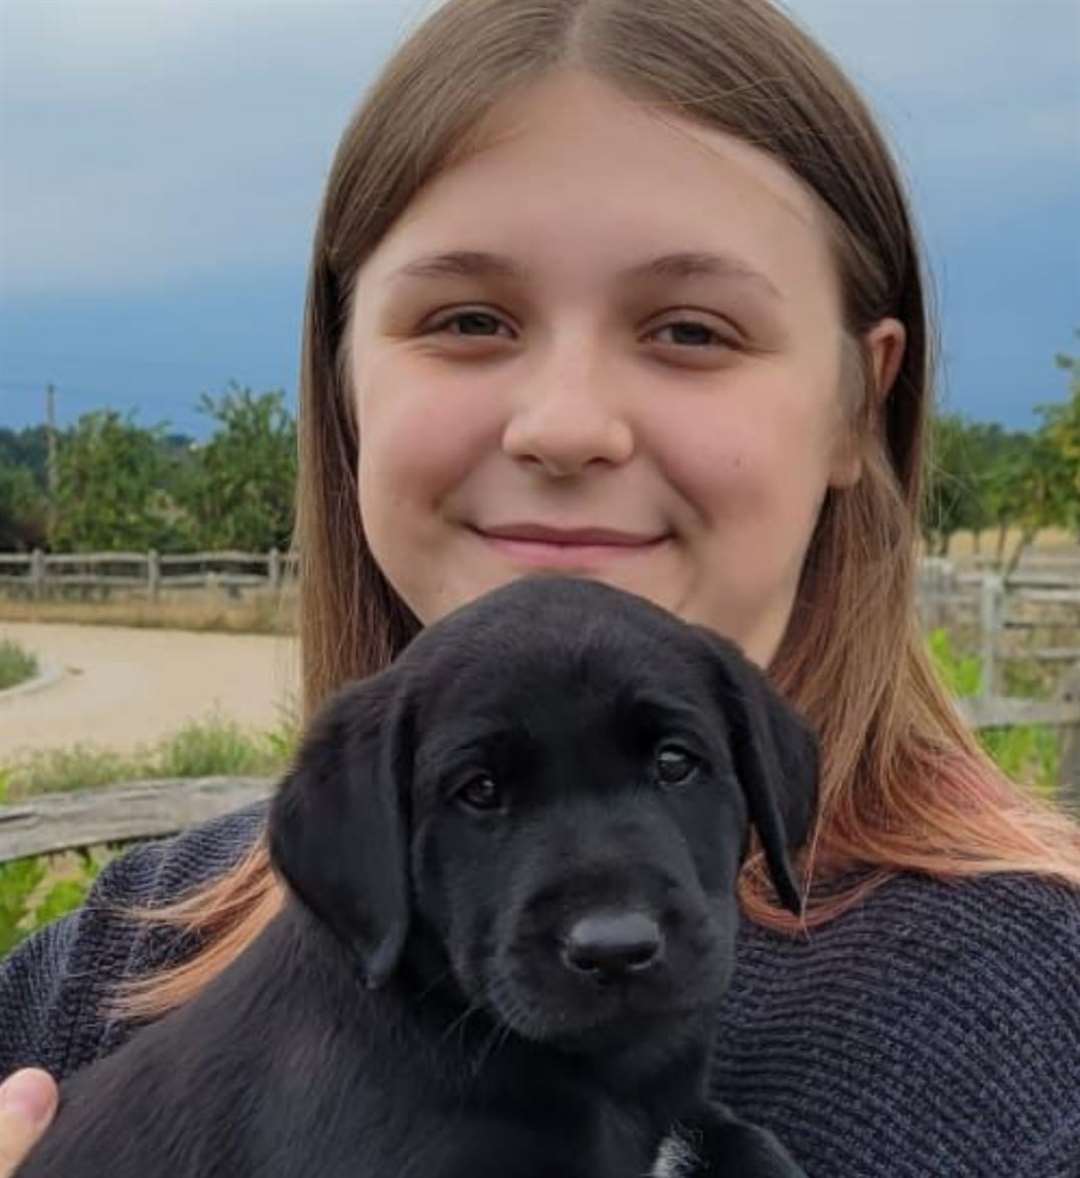 The Maidstone teen will be getting her new assistance dog Jasper at the end of August